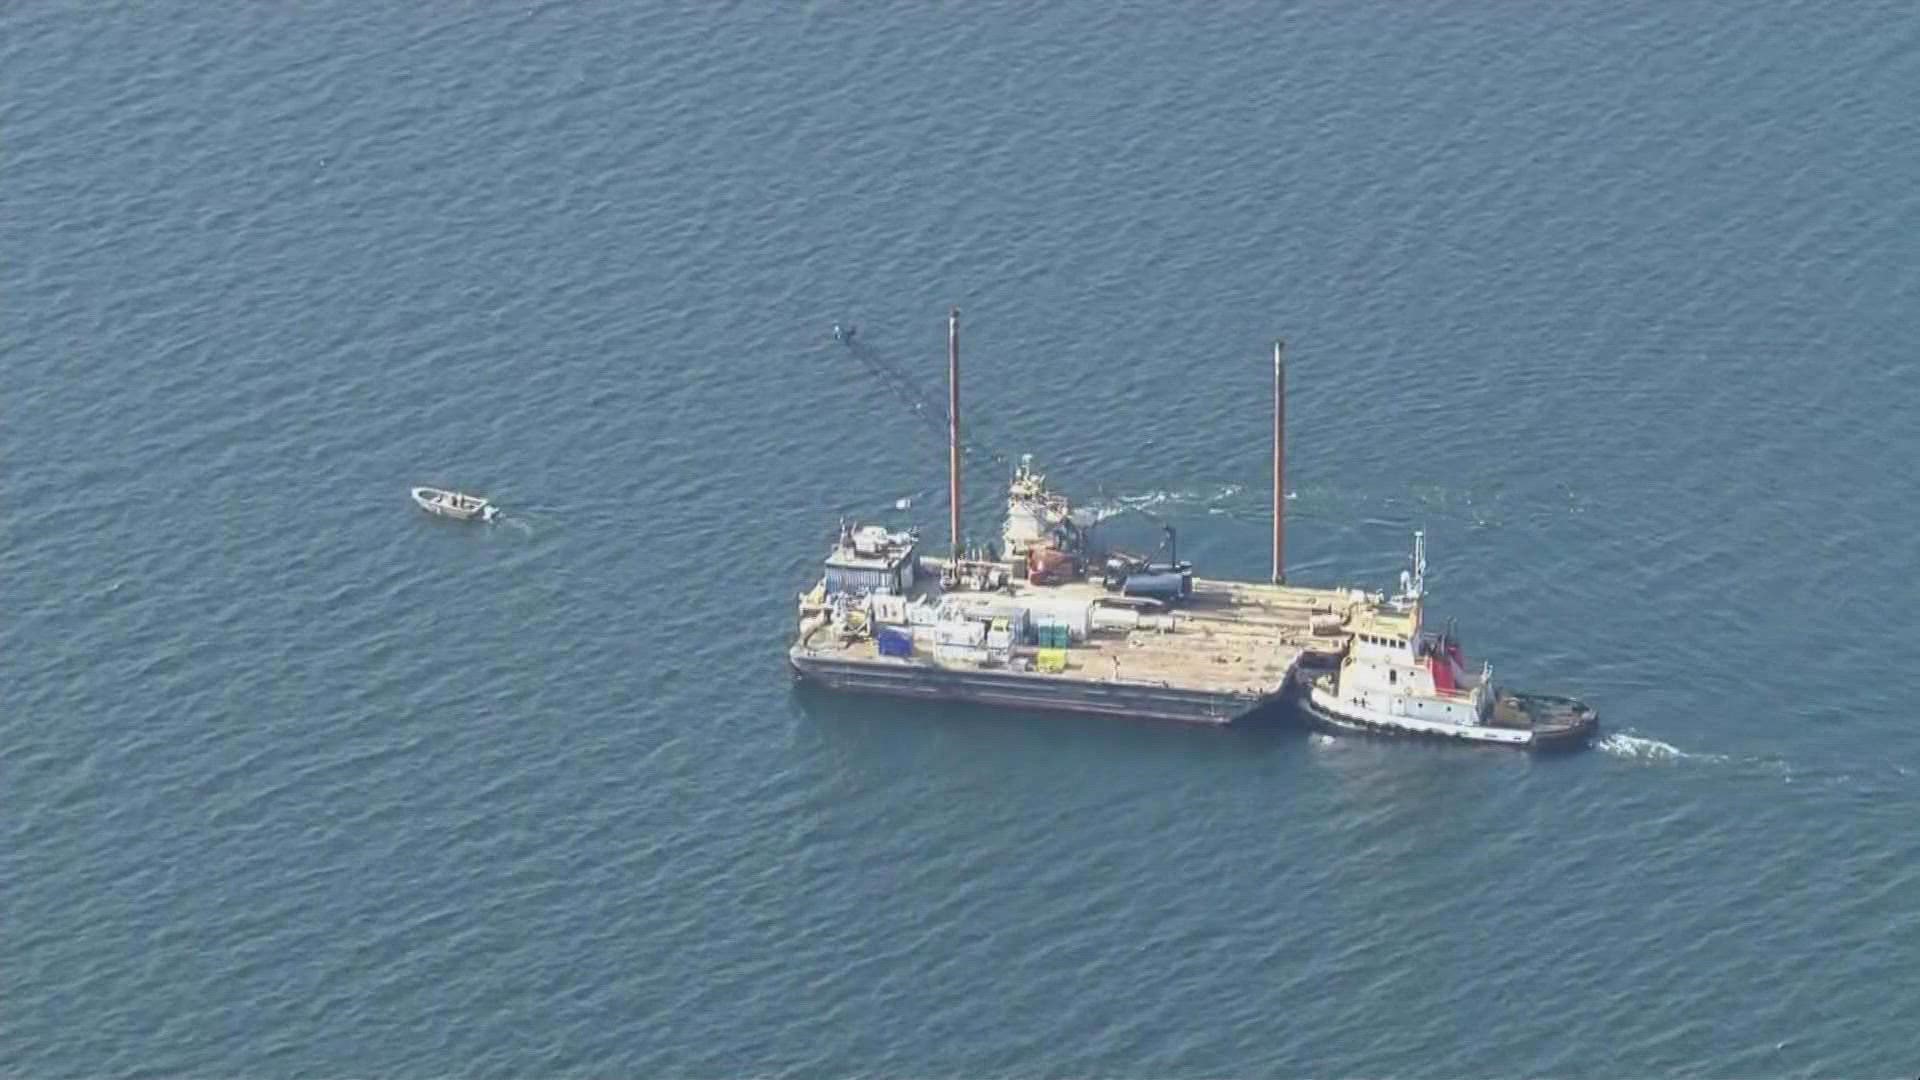 The National Transportation Safety Board and the U.S. Navy have began efforts to recover the wreckage of the floatplane that crashed off Whidbey Island.